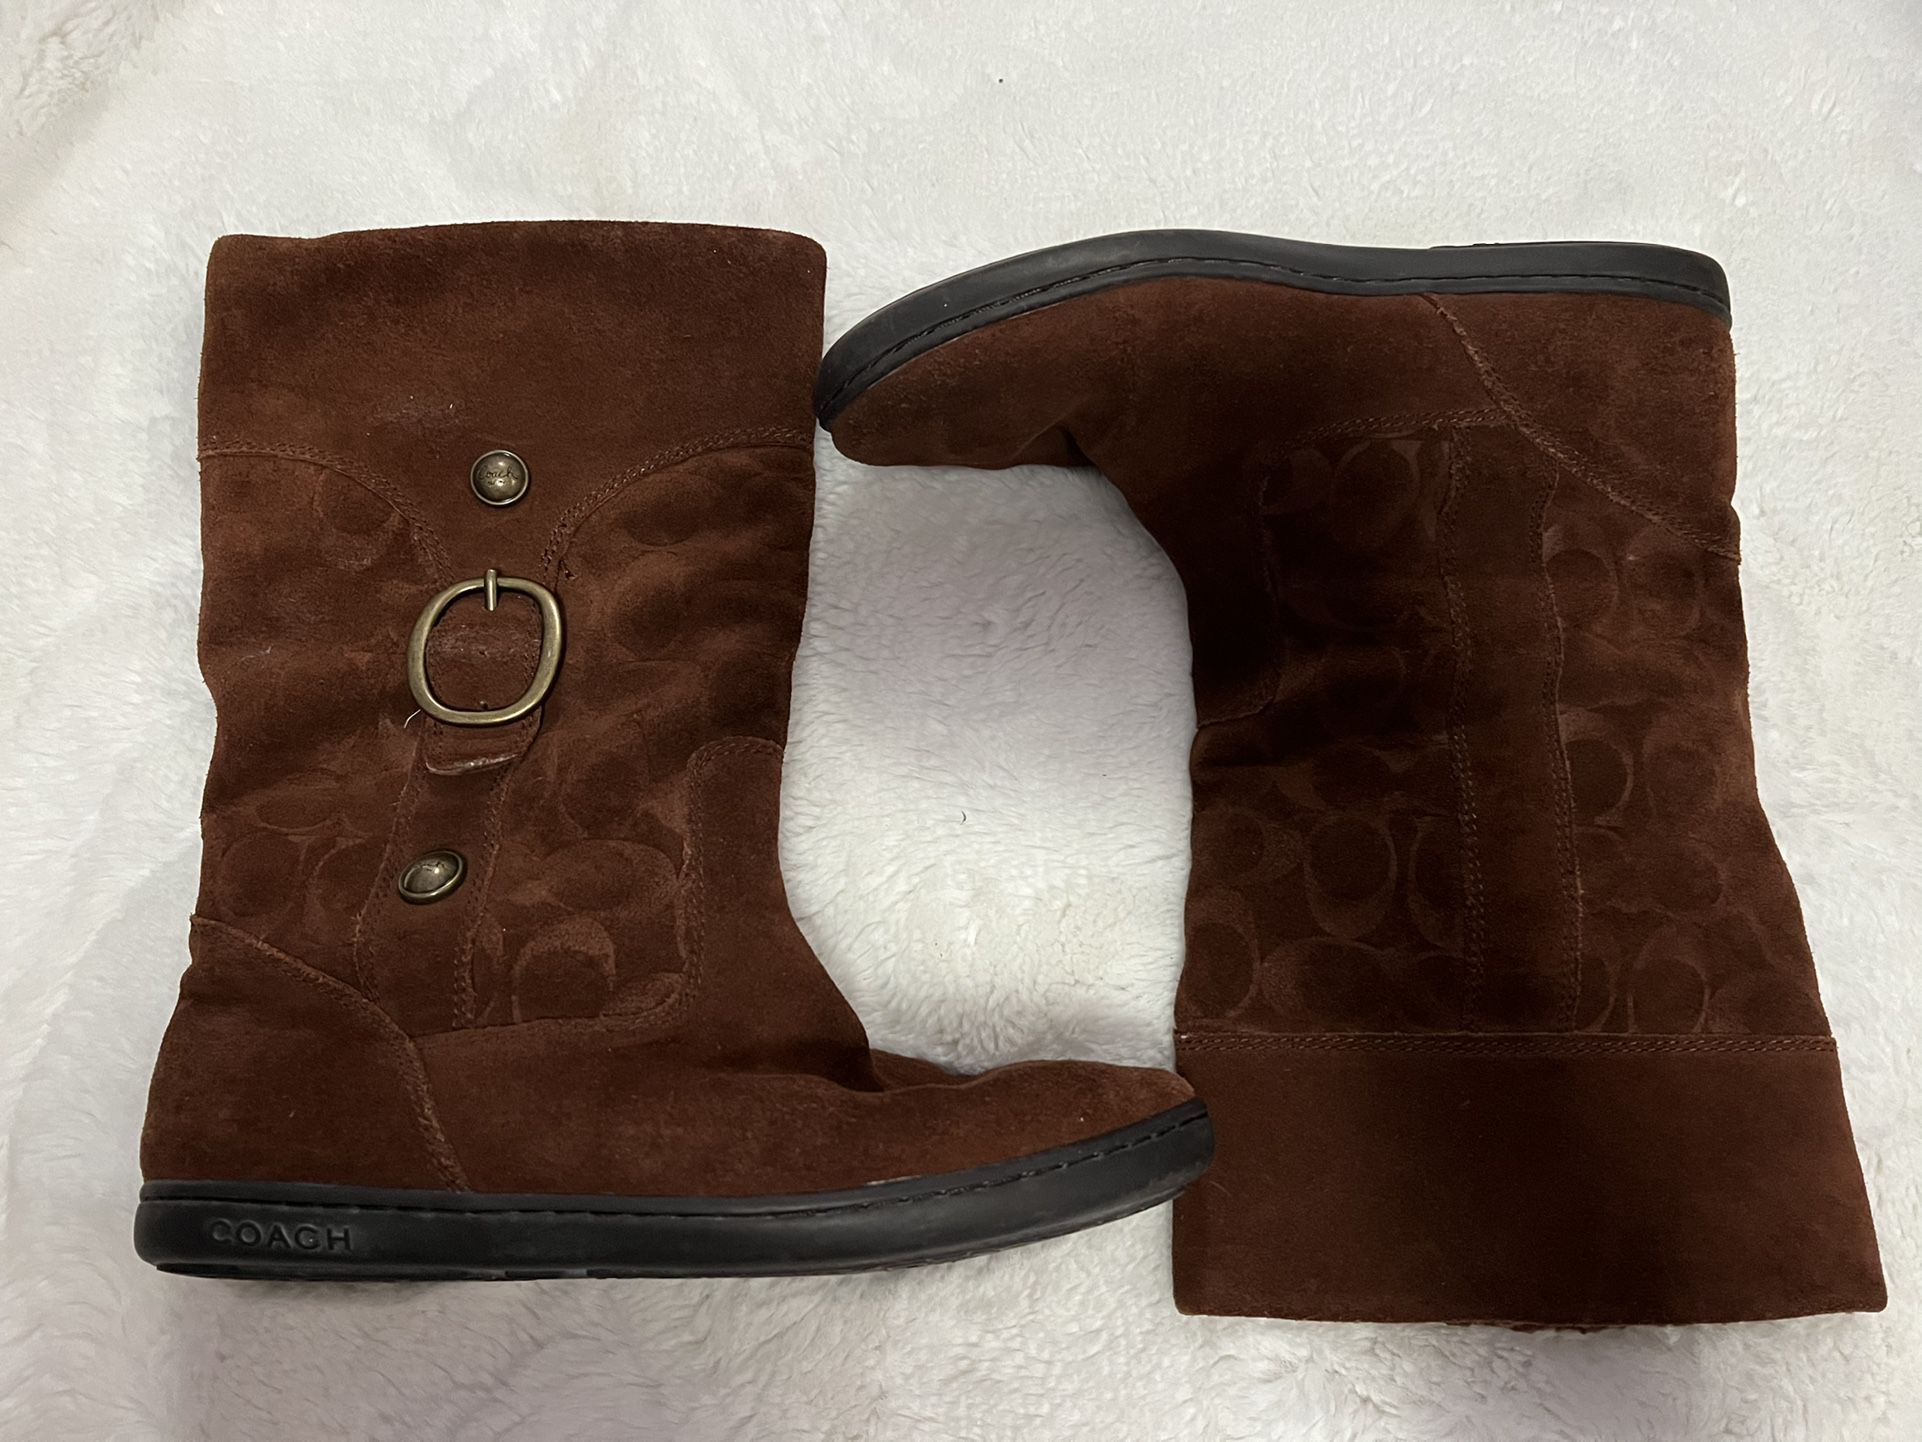 COACH Women's Meyer Signature C Brown Suede Winter Boots Size 8.5 (LIKE NEW) - $60